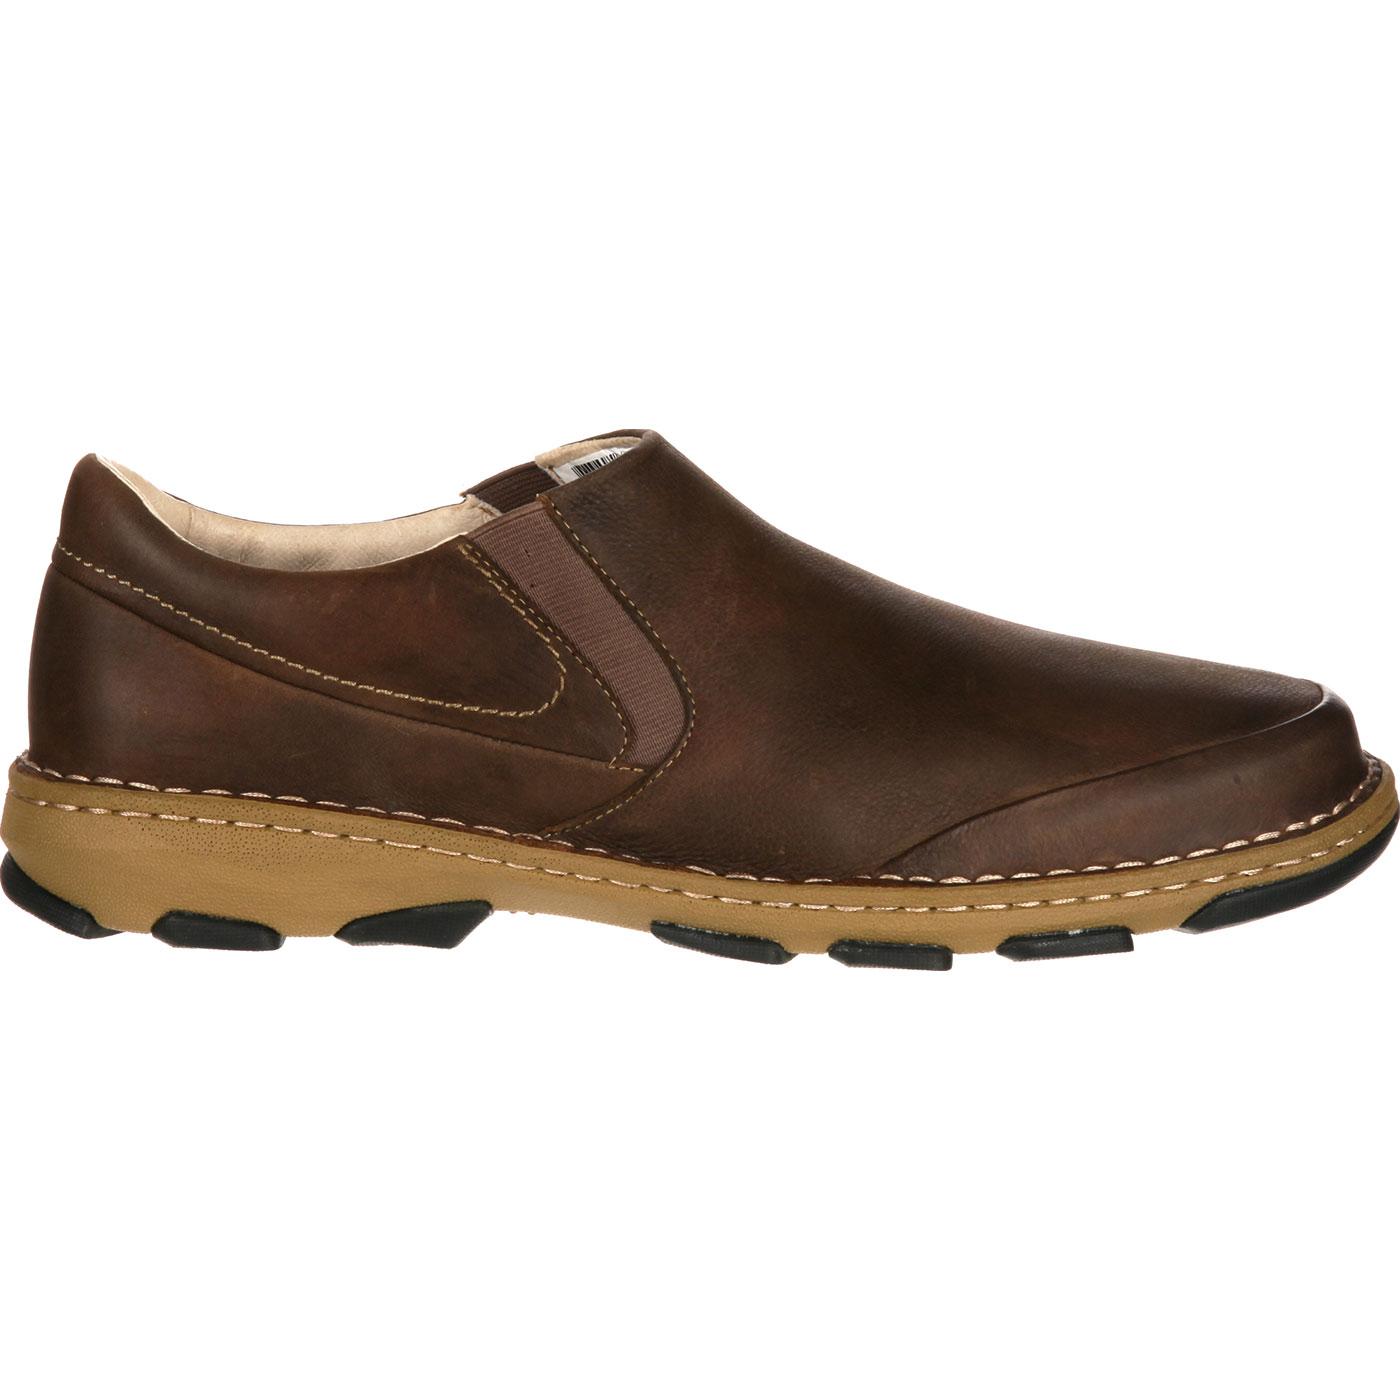 Rocky Cruiser Casual: Men's Brown Leather Slip-On Shoes